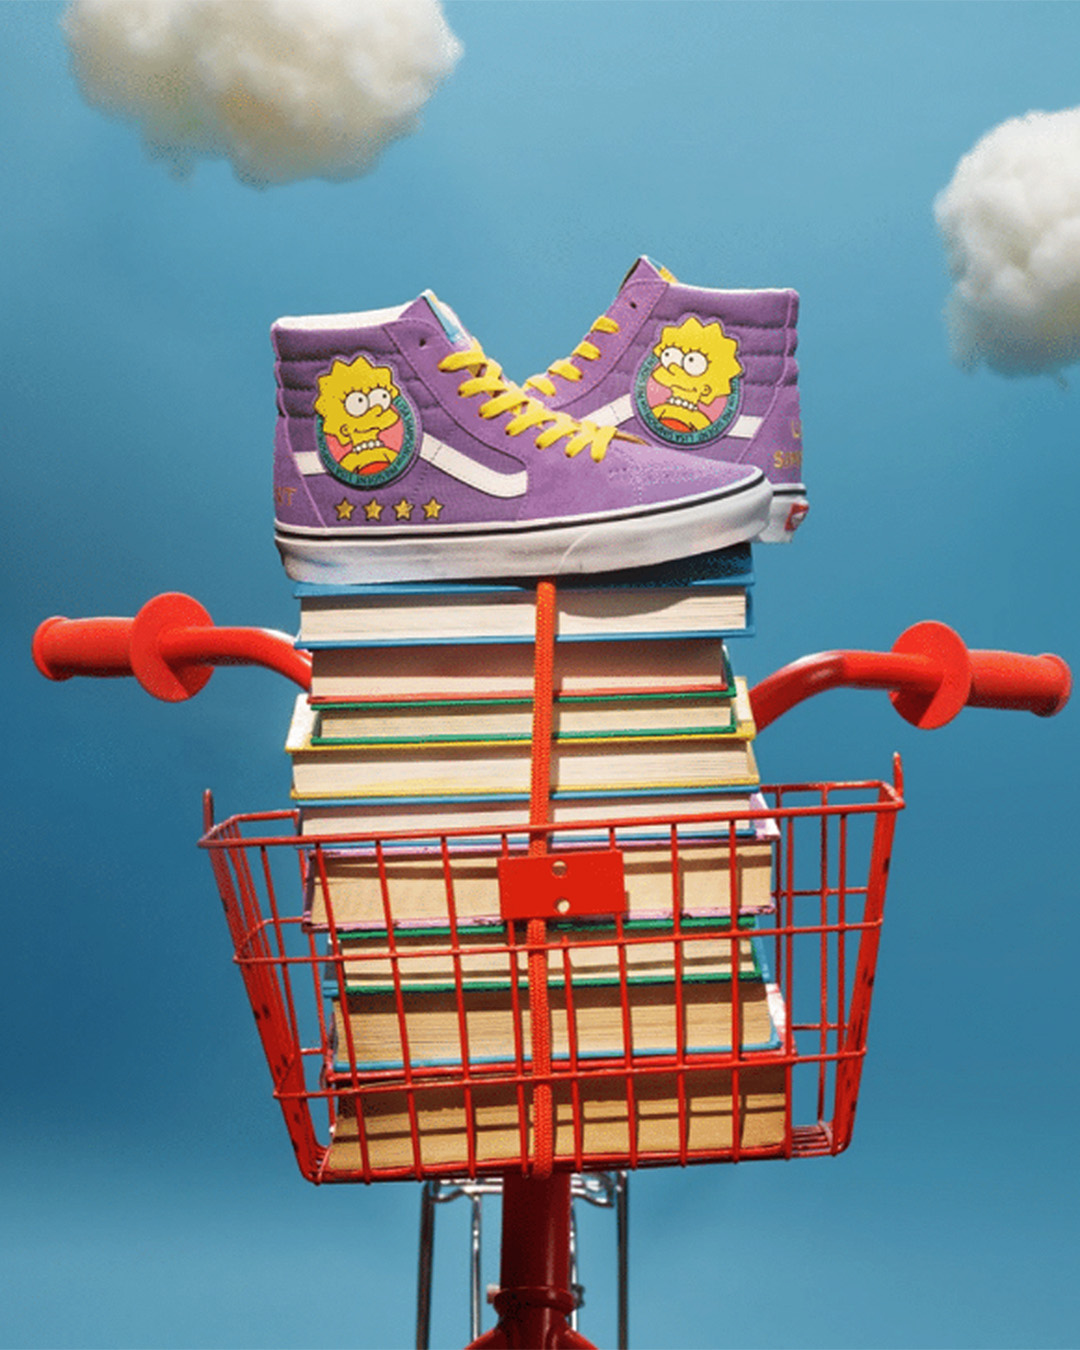 The Simpsons x Vans Sk8-Hi tops featuring Lisa Simpson and emblazoned with a Lisa Simpson badge.